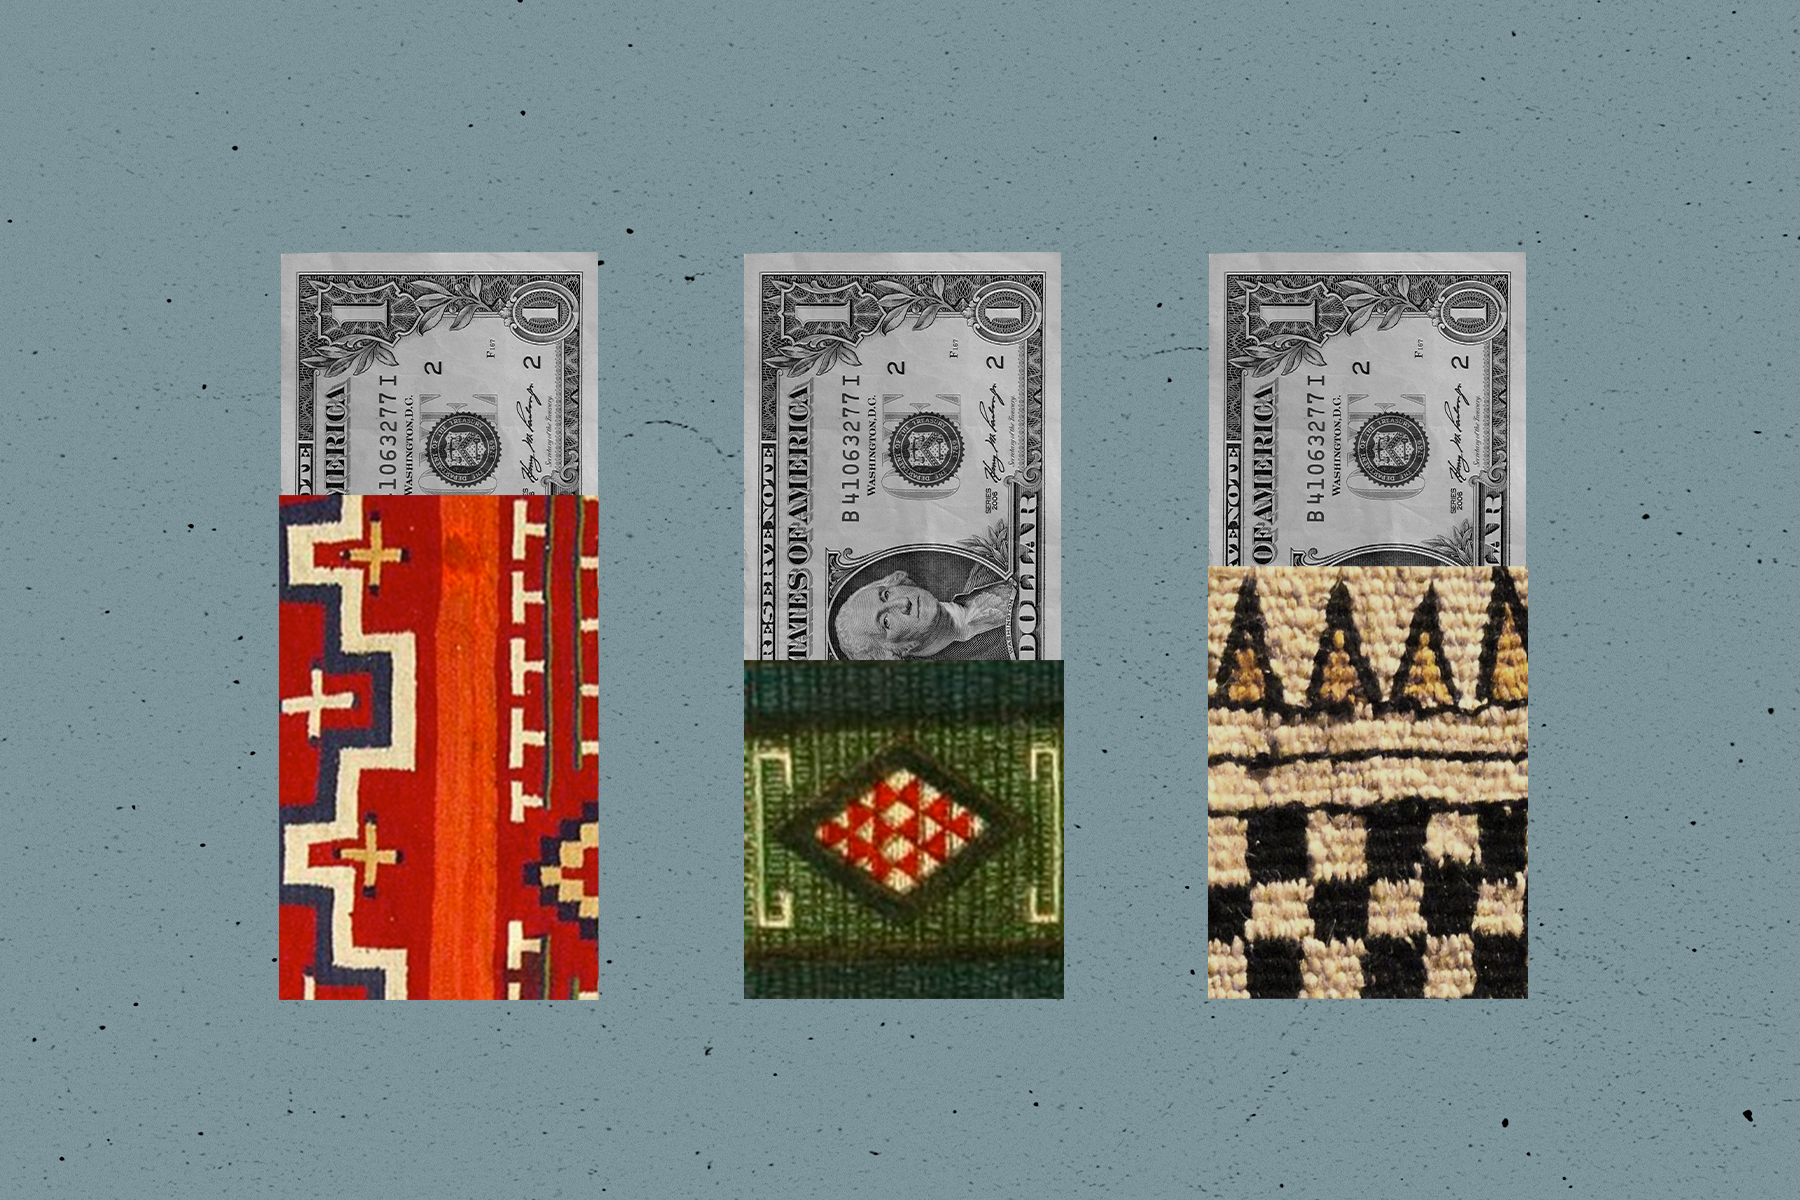 An illustration featuring textiles from (left to right) the Navajo, Zuni and Salish tribes.